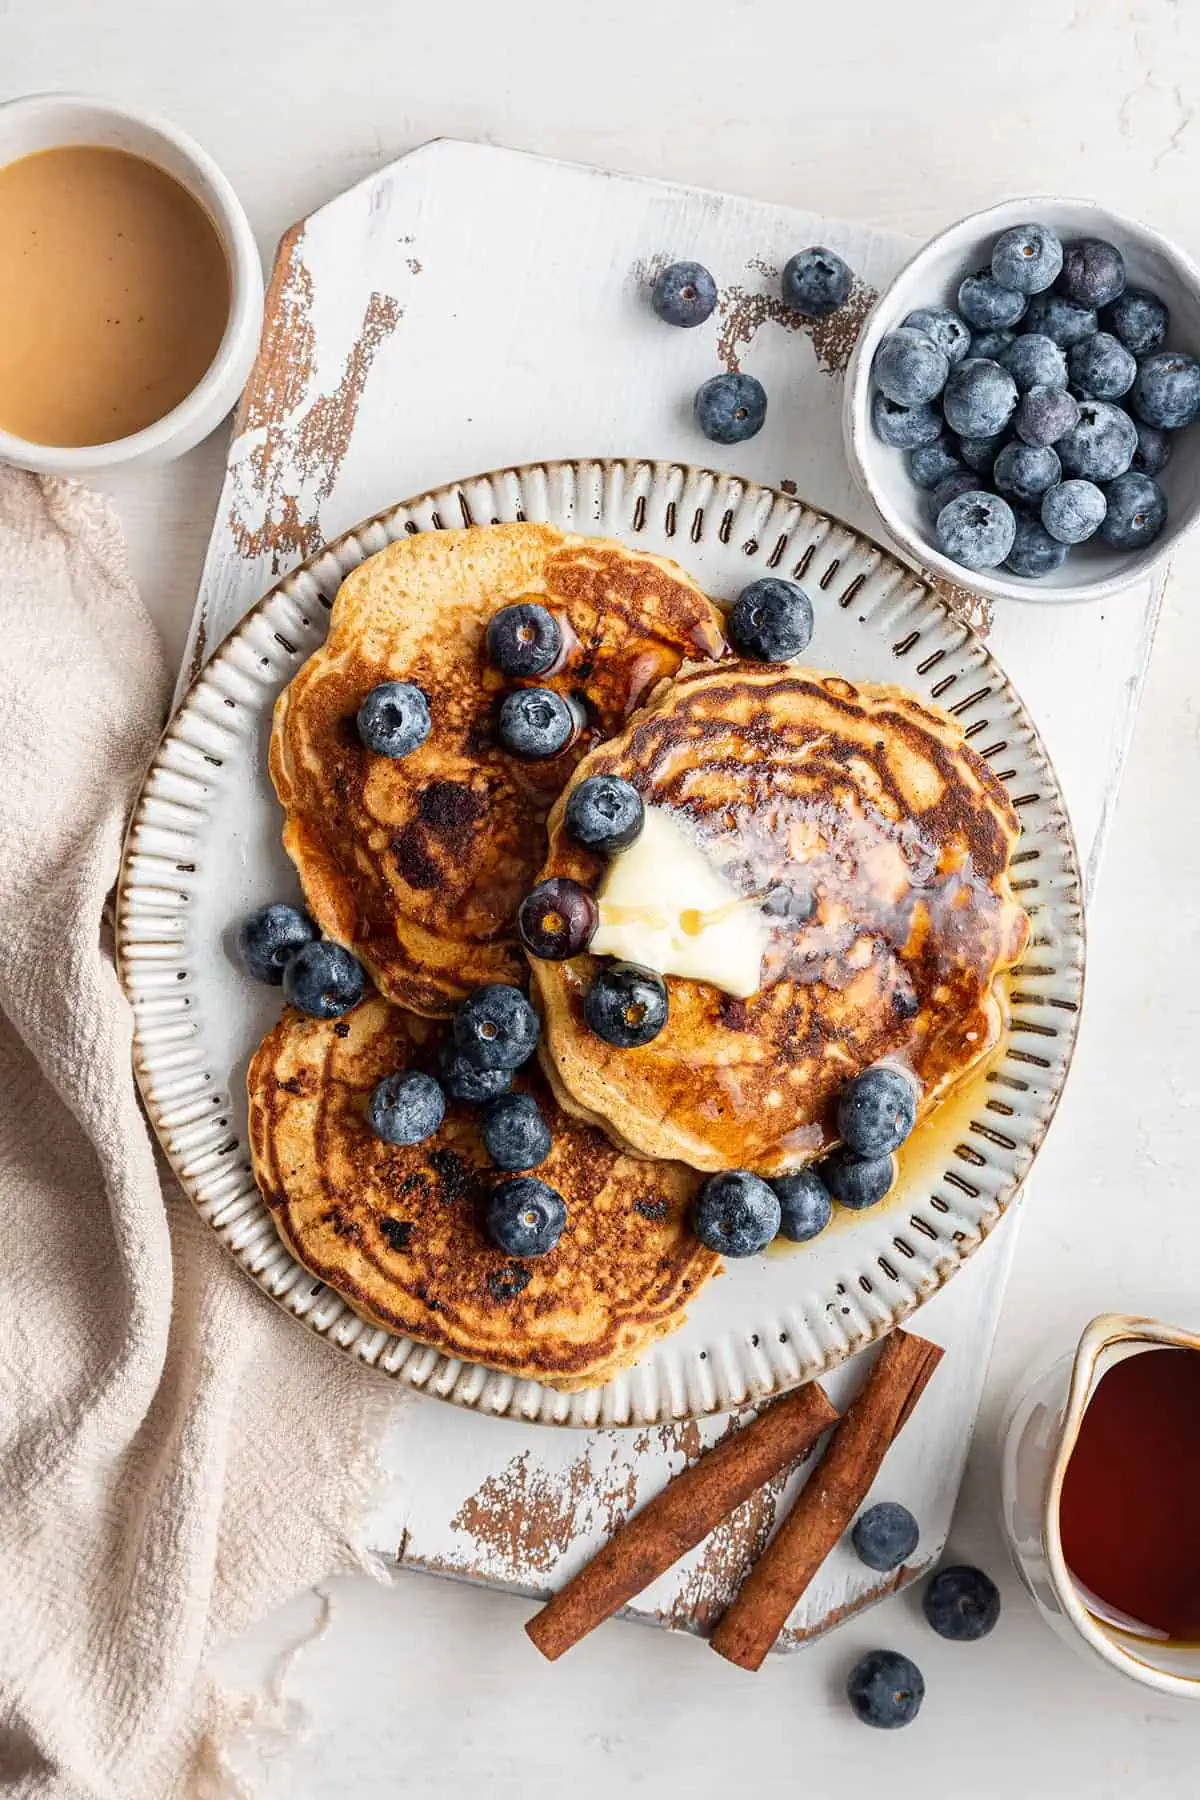 Overhead view of a plate of three pancakes topped with butter, maple syrup, and blueberries, next to a bowl of blueberries, cinnamon sticks, and a cup of coffee